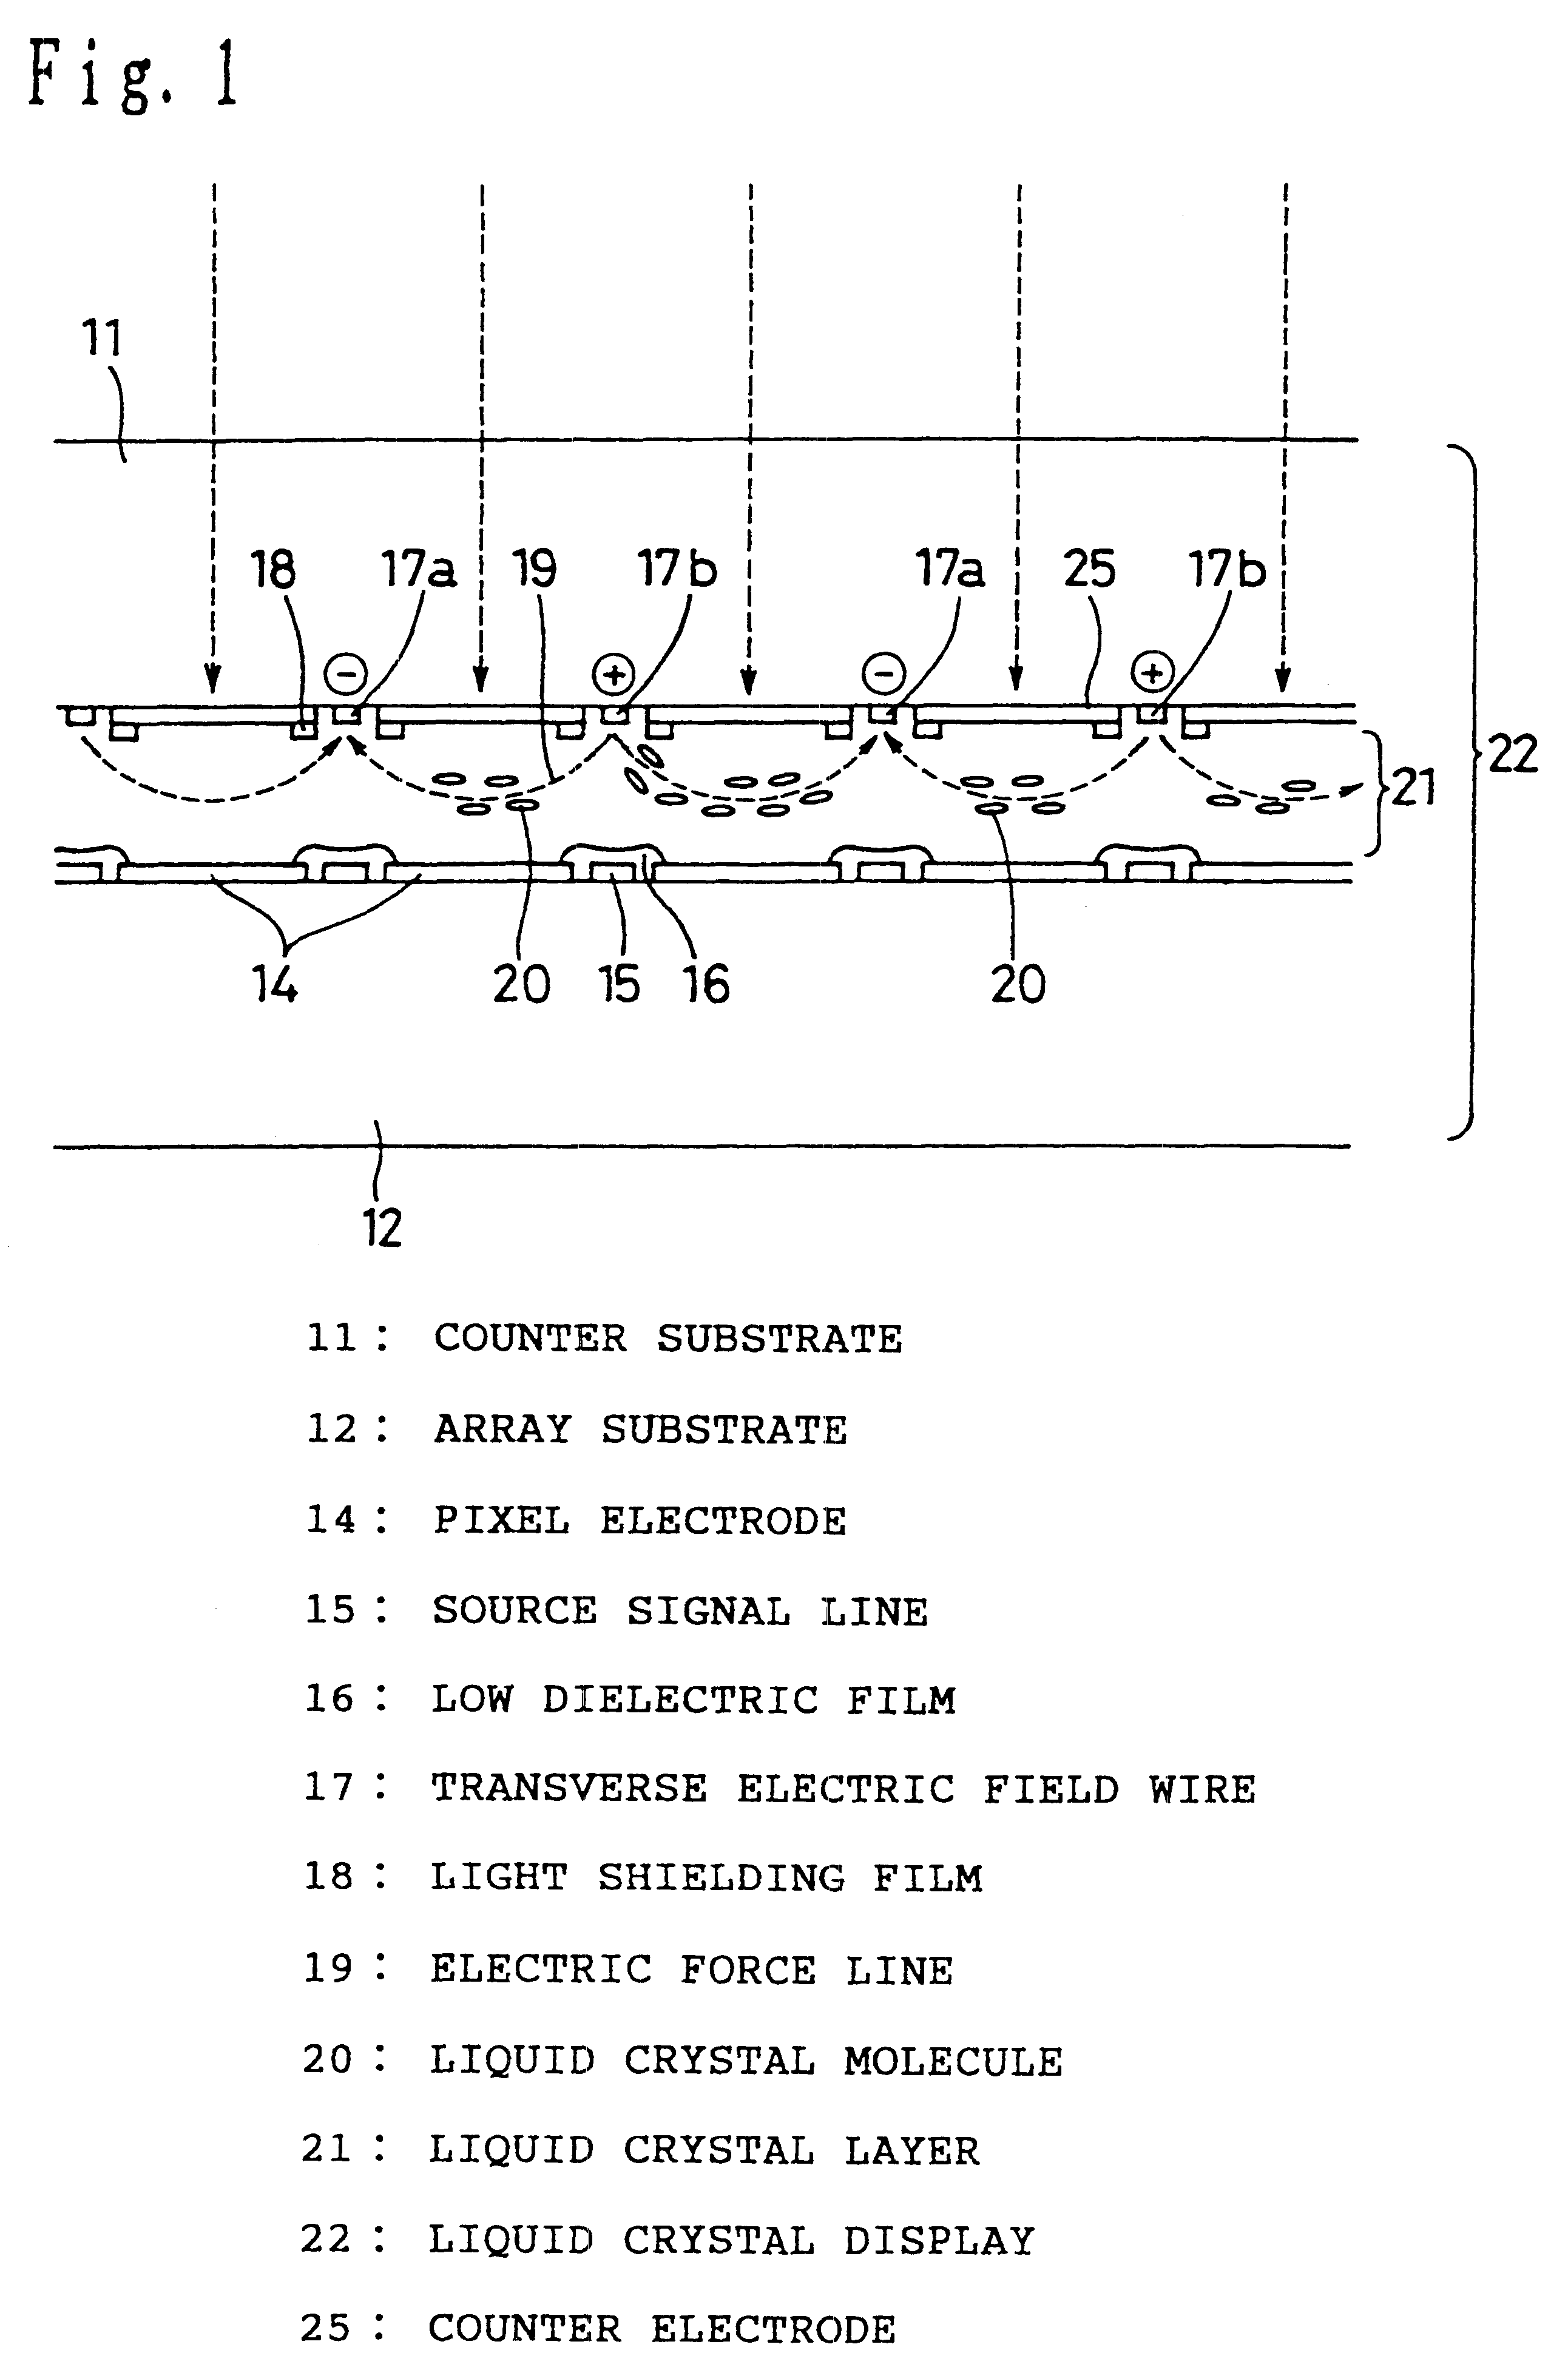 Liquid crystal display panel including a light shielding film to control incident light